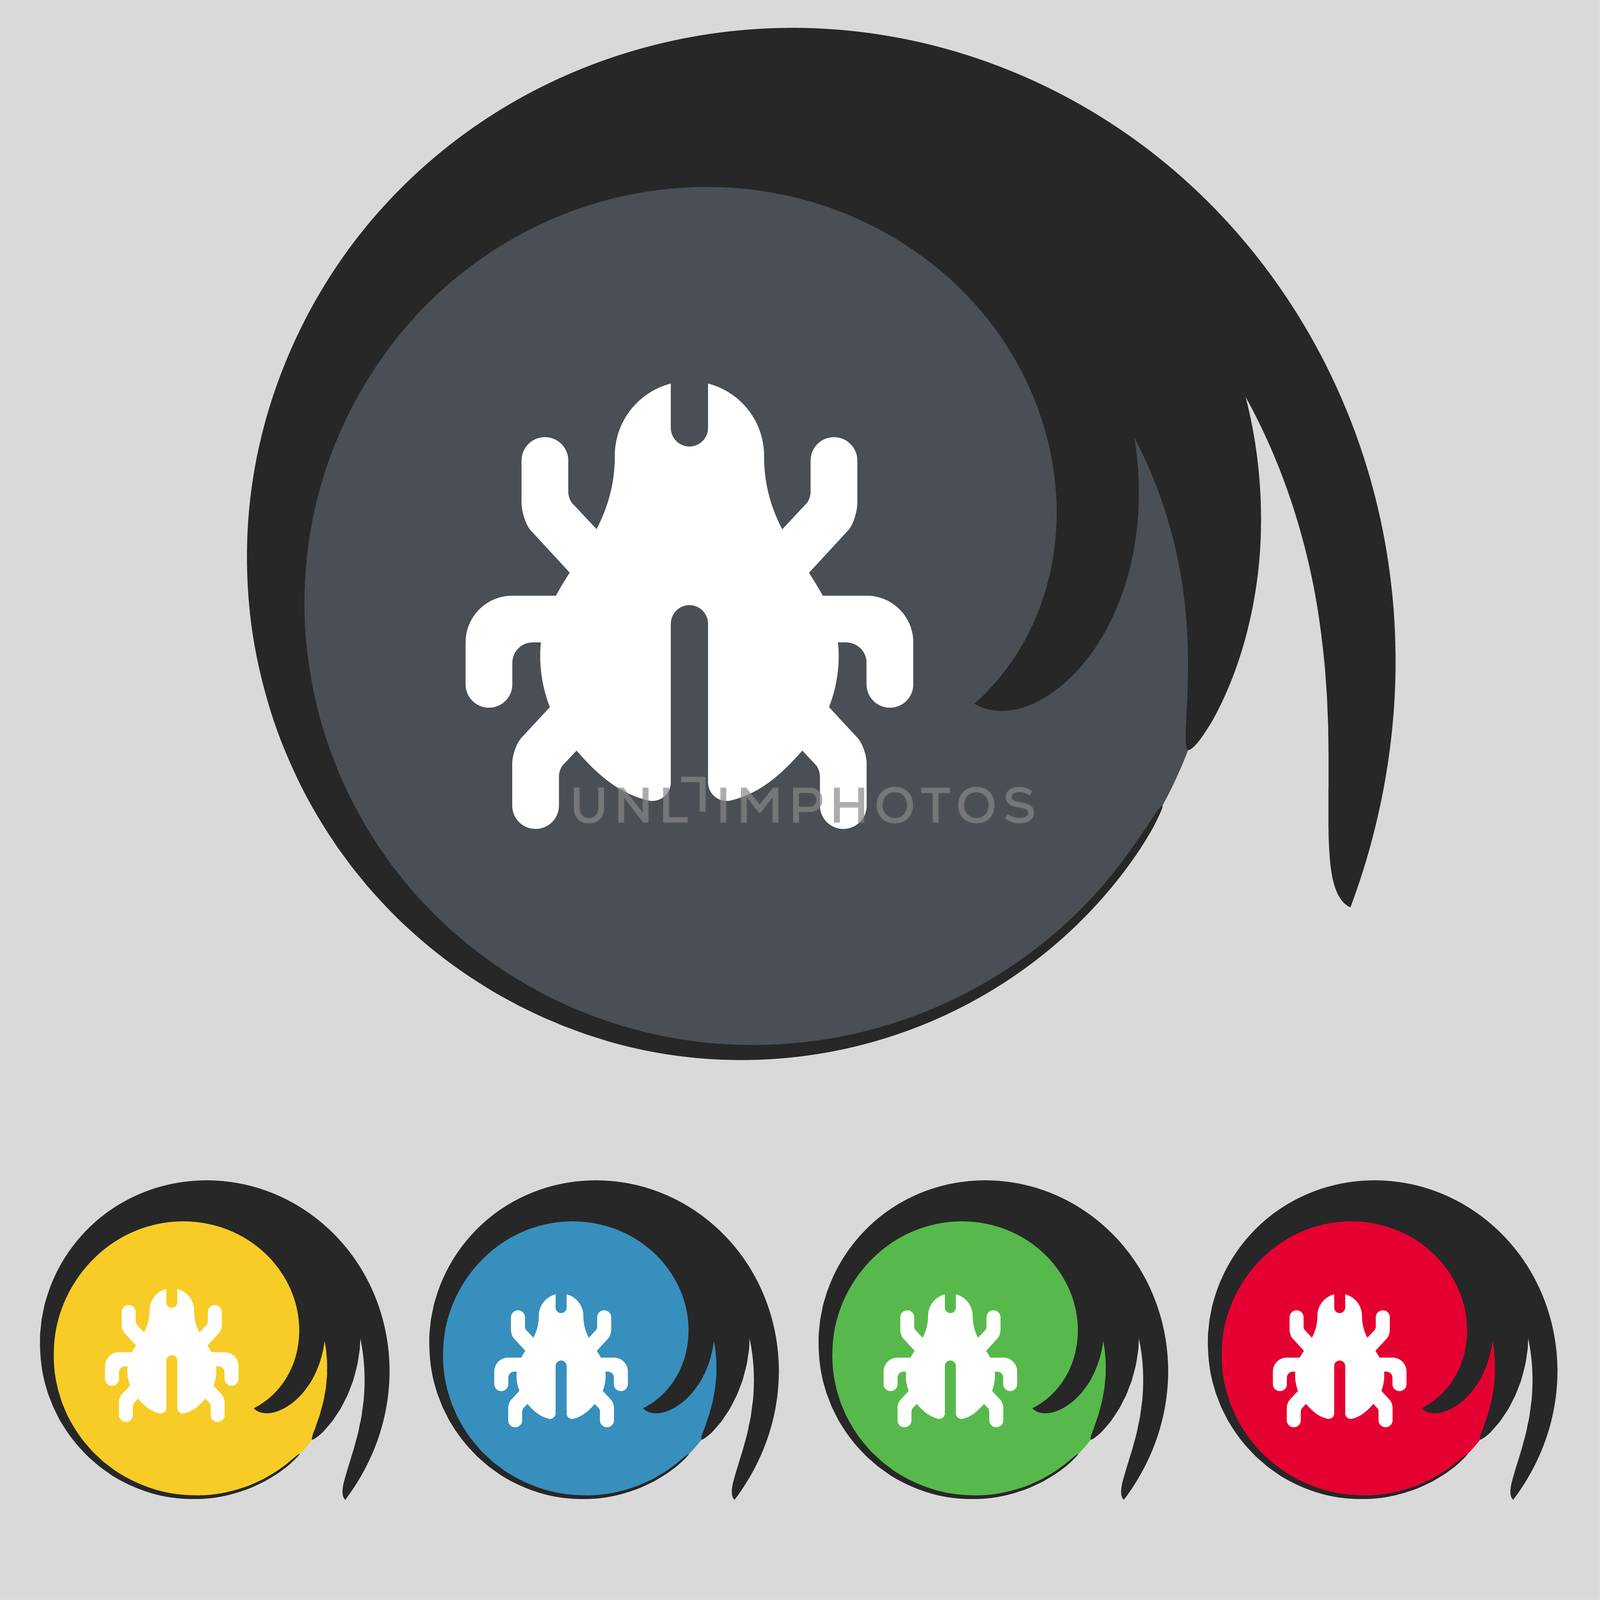 Software Bug, Virus, Disinfection, beetle icon sign. Symbol on five colored buttons. illustration